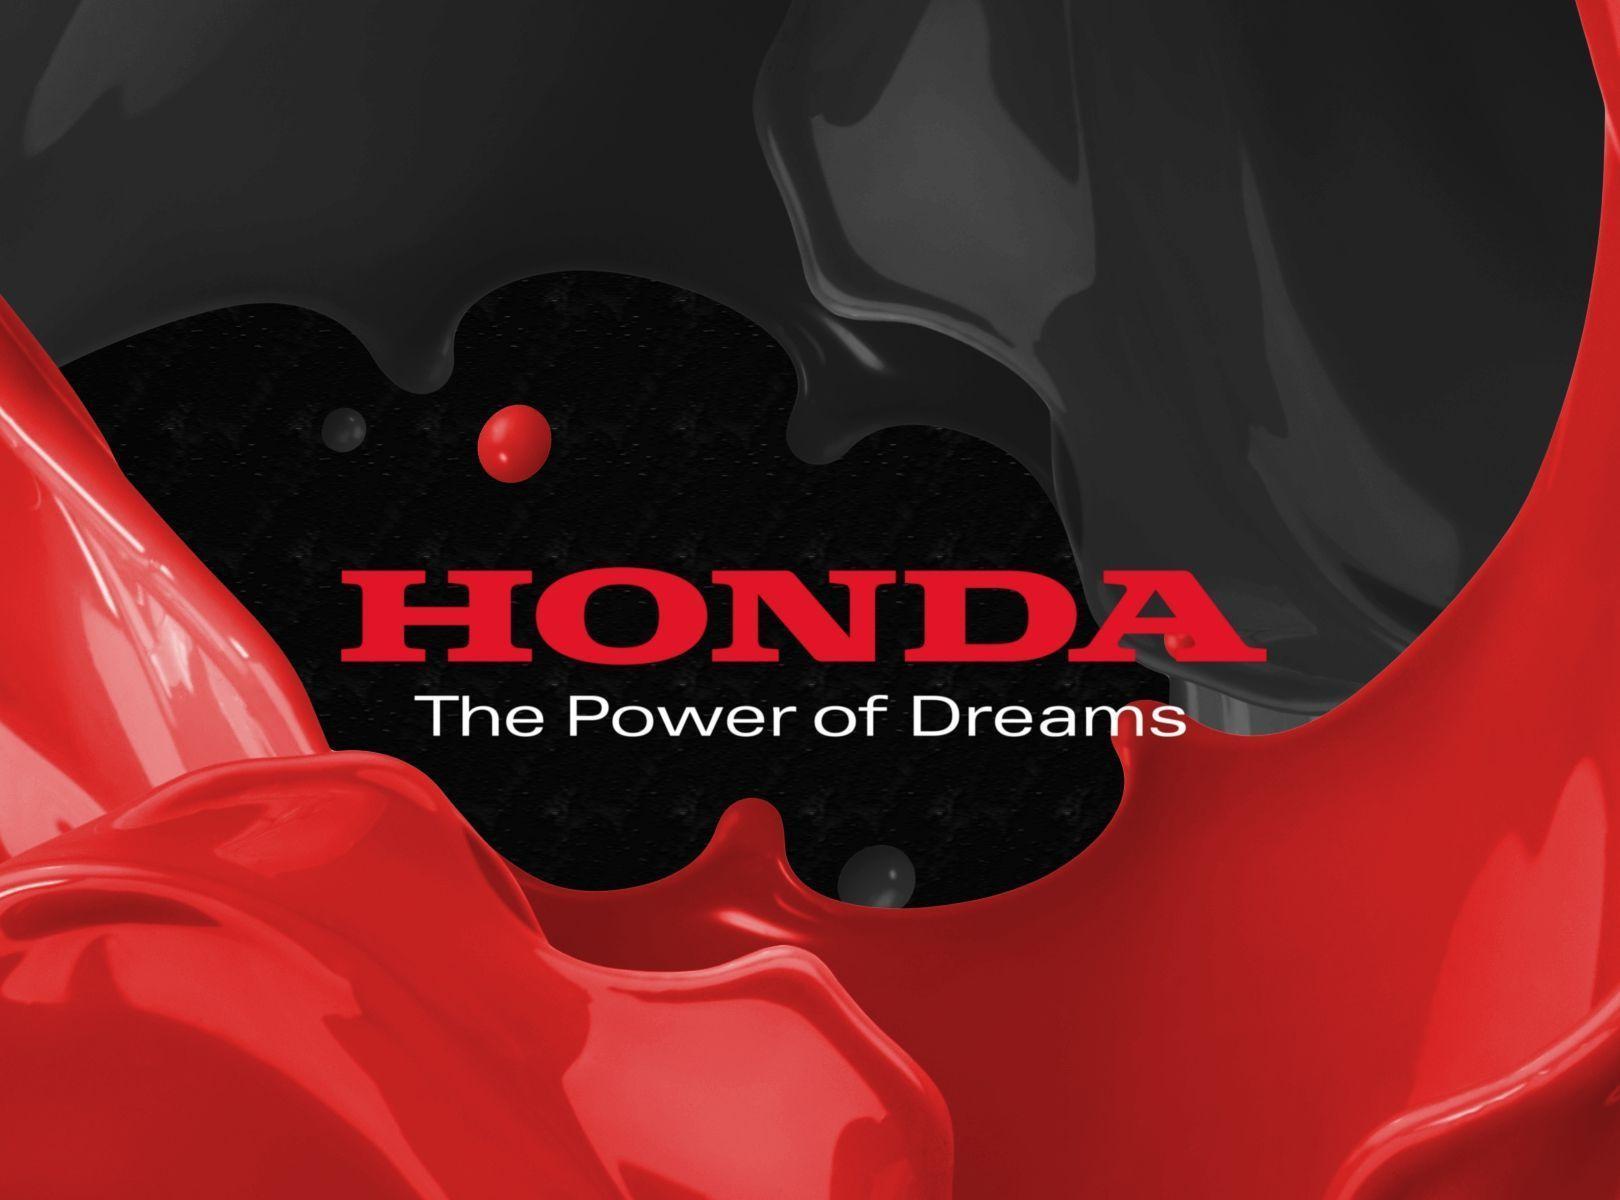 Jdm Honda Iphone Wallpapers – Search Results – Personal News